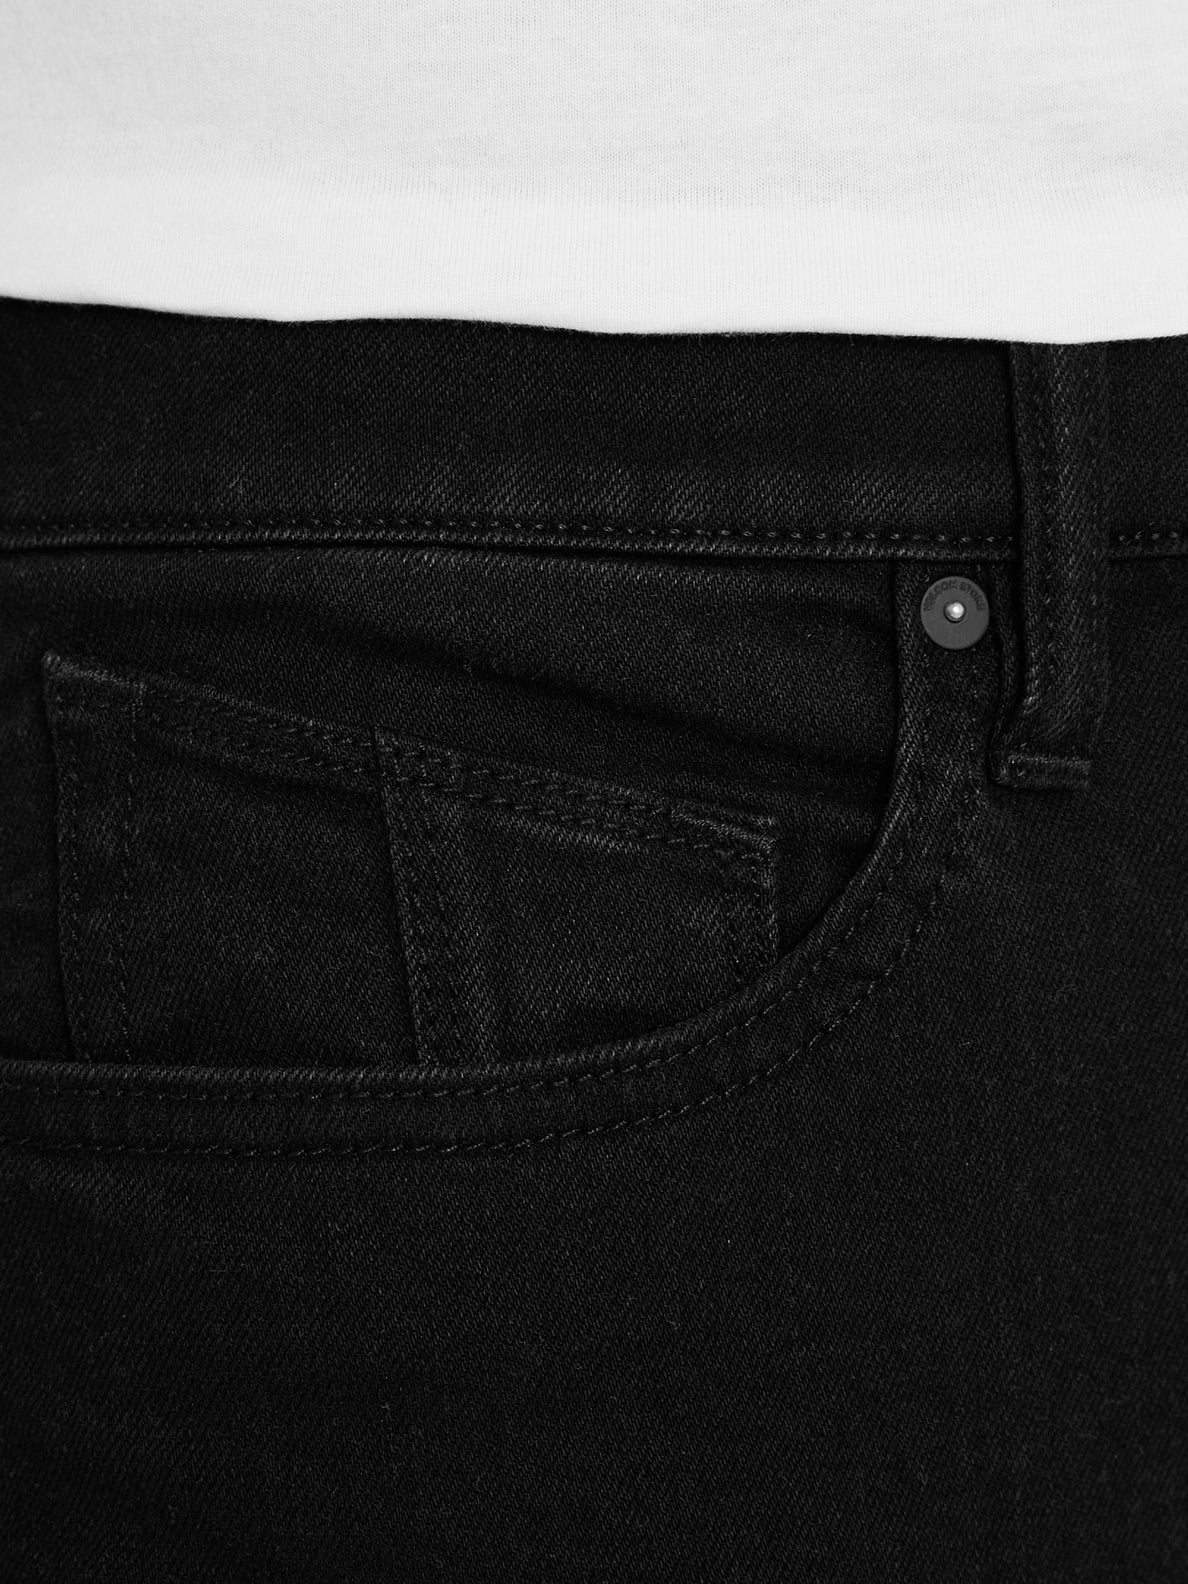 Solver Modern Fit Jeans - Black Out